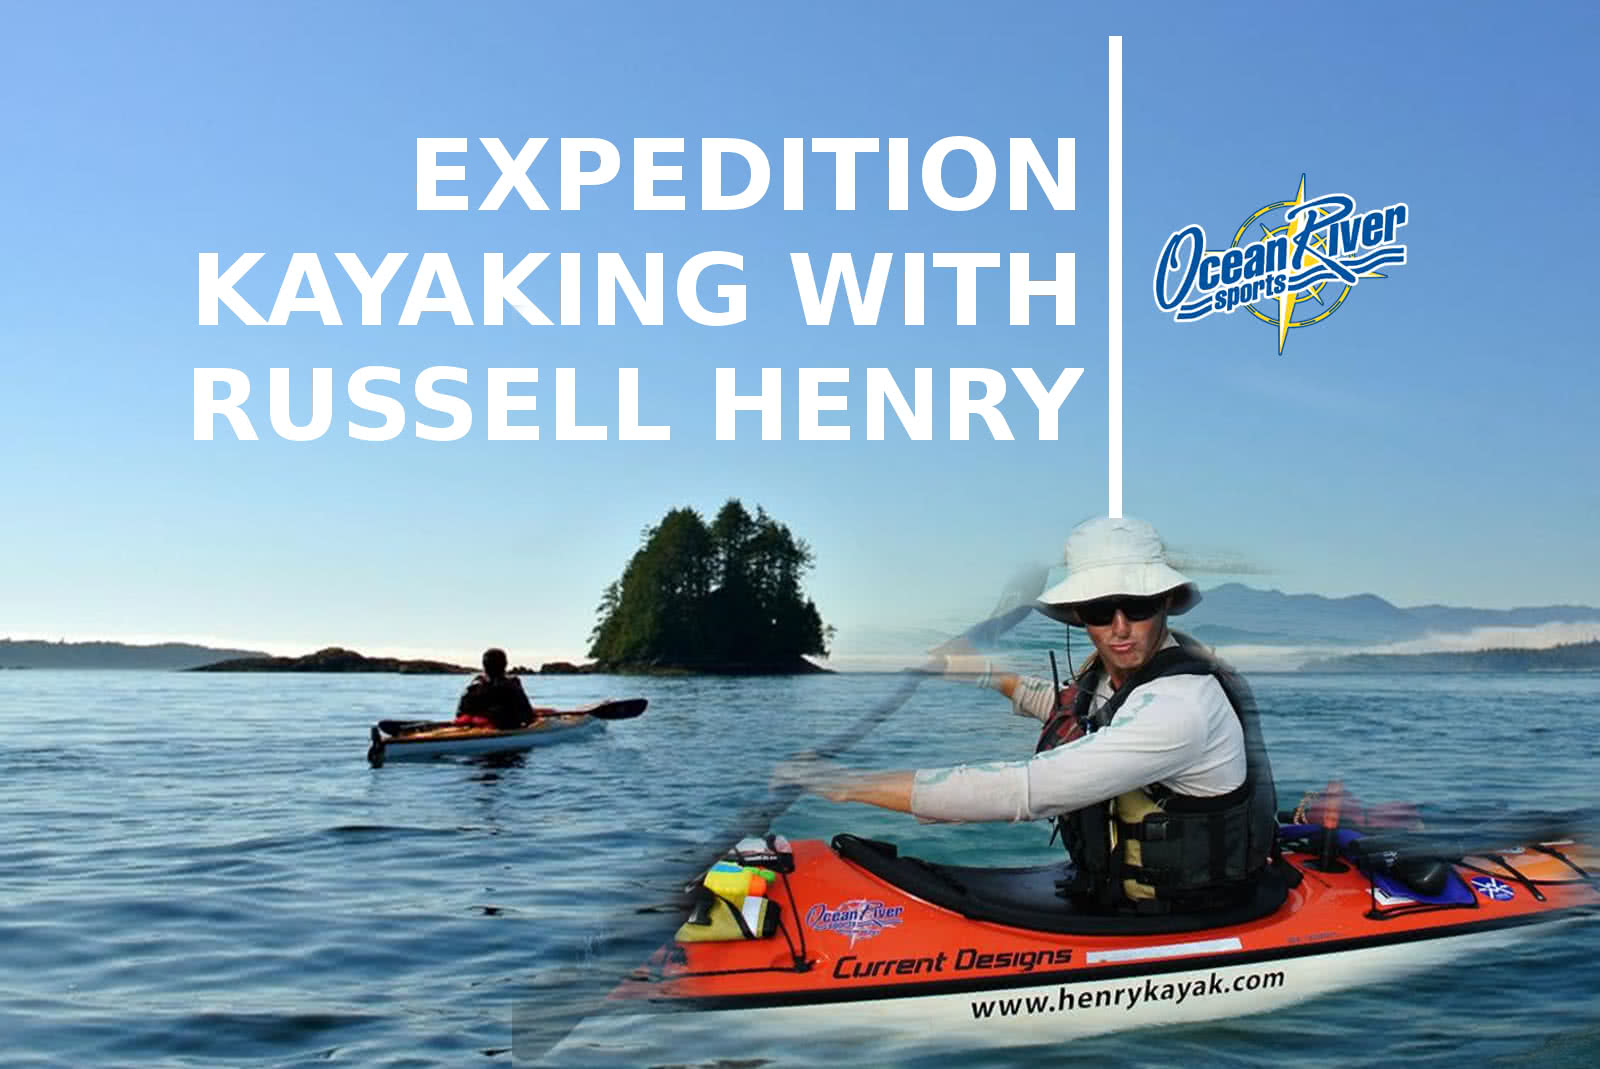 Expedition Kayaking with Russell Henry